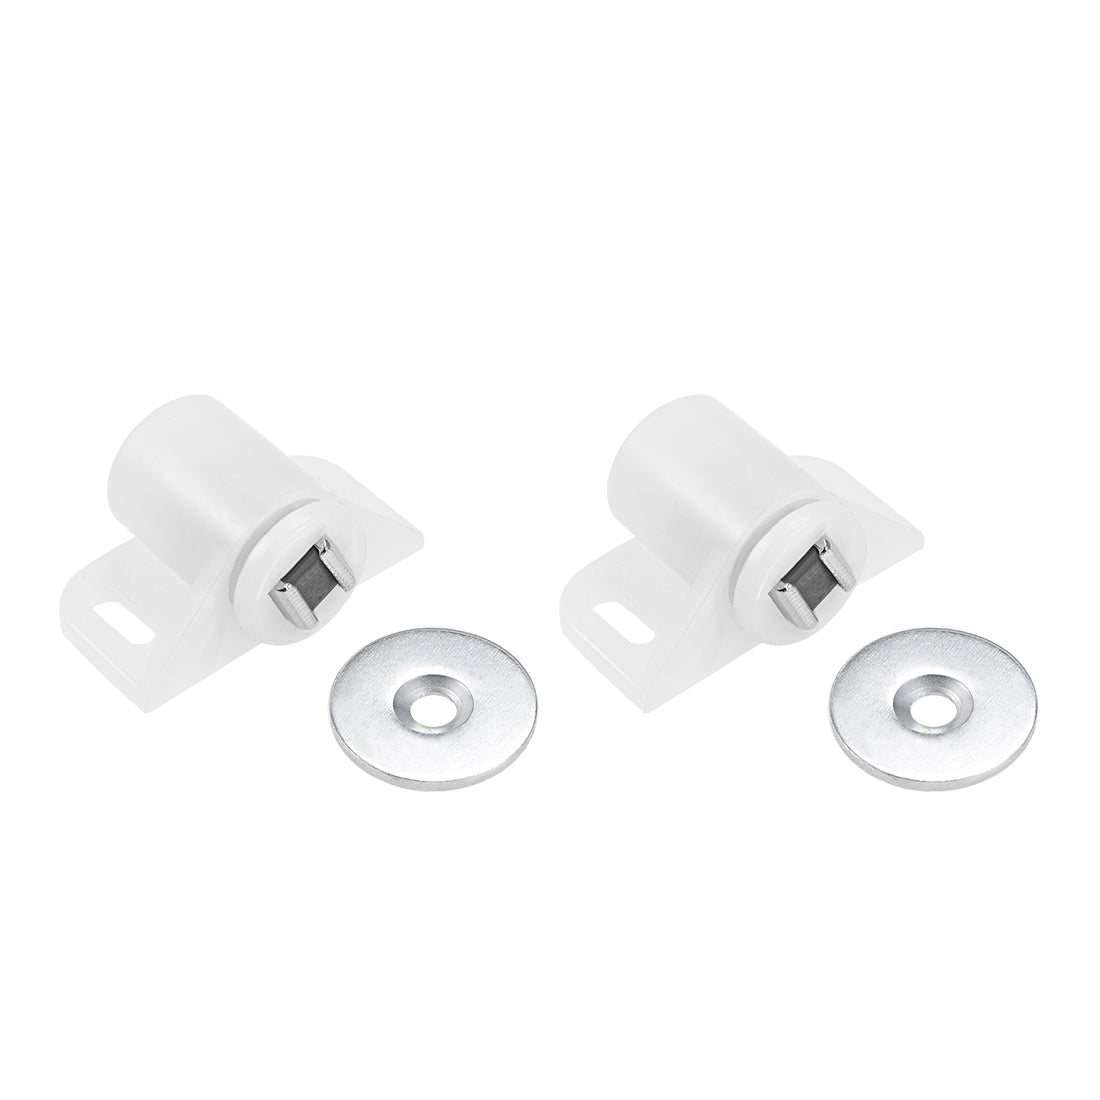 uxcell Uxcell Magnetic Latches Catch, Cabinet Door Magnet Latch for Cupboard Closet White 2pcs